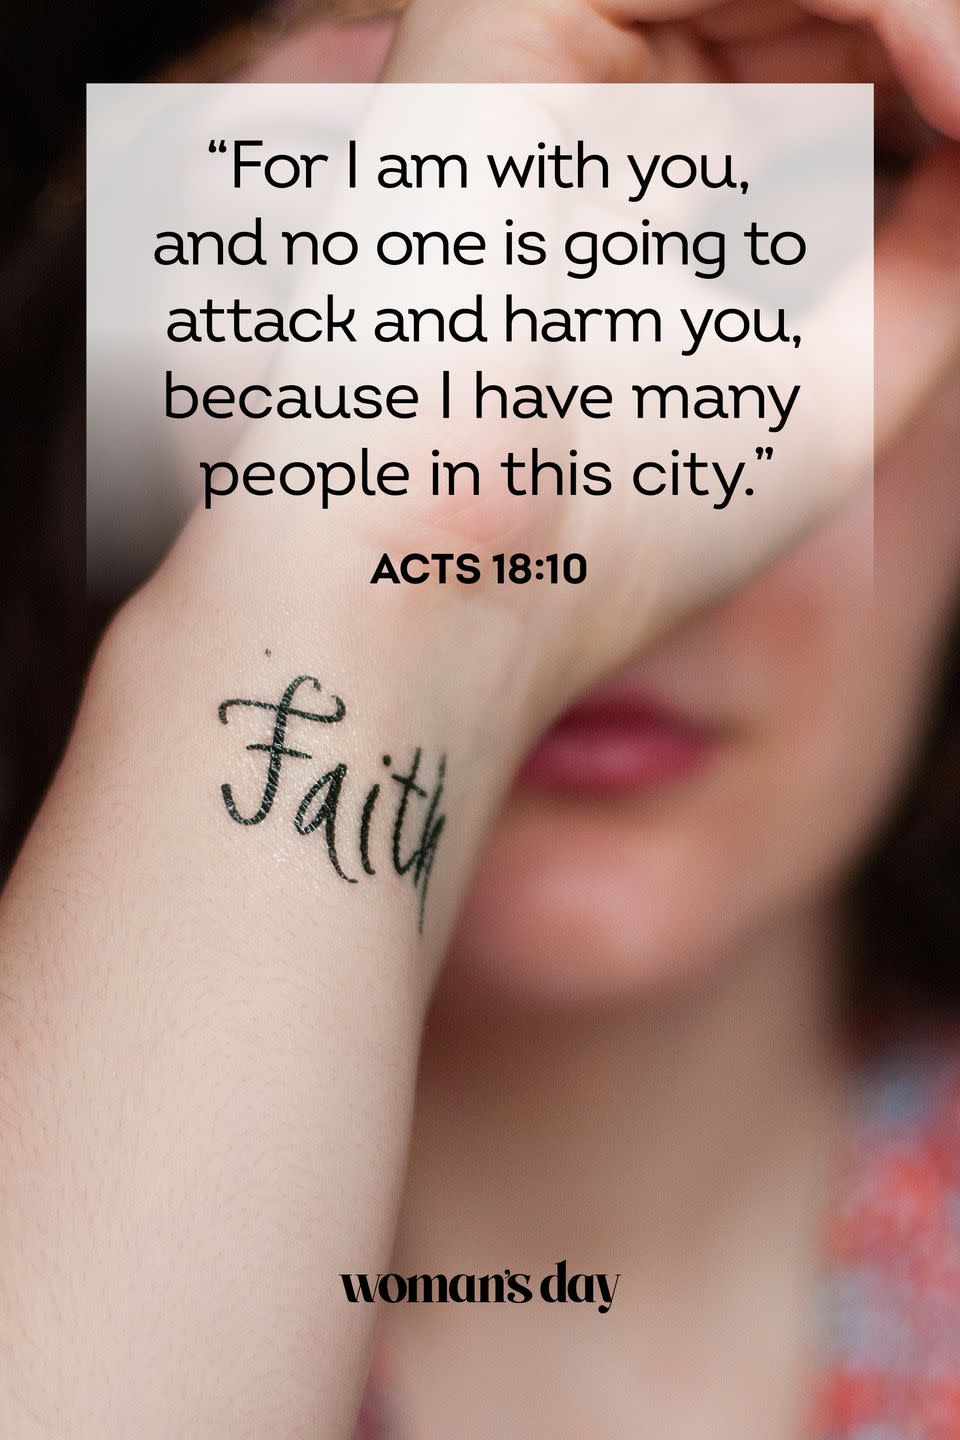 Acts 18:10